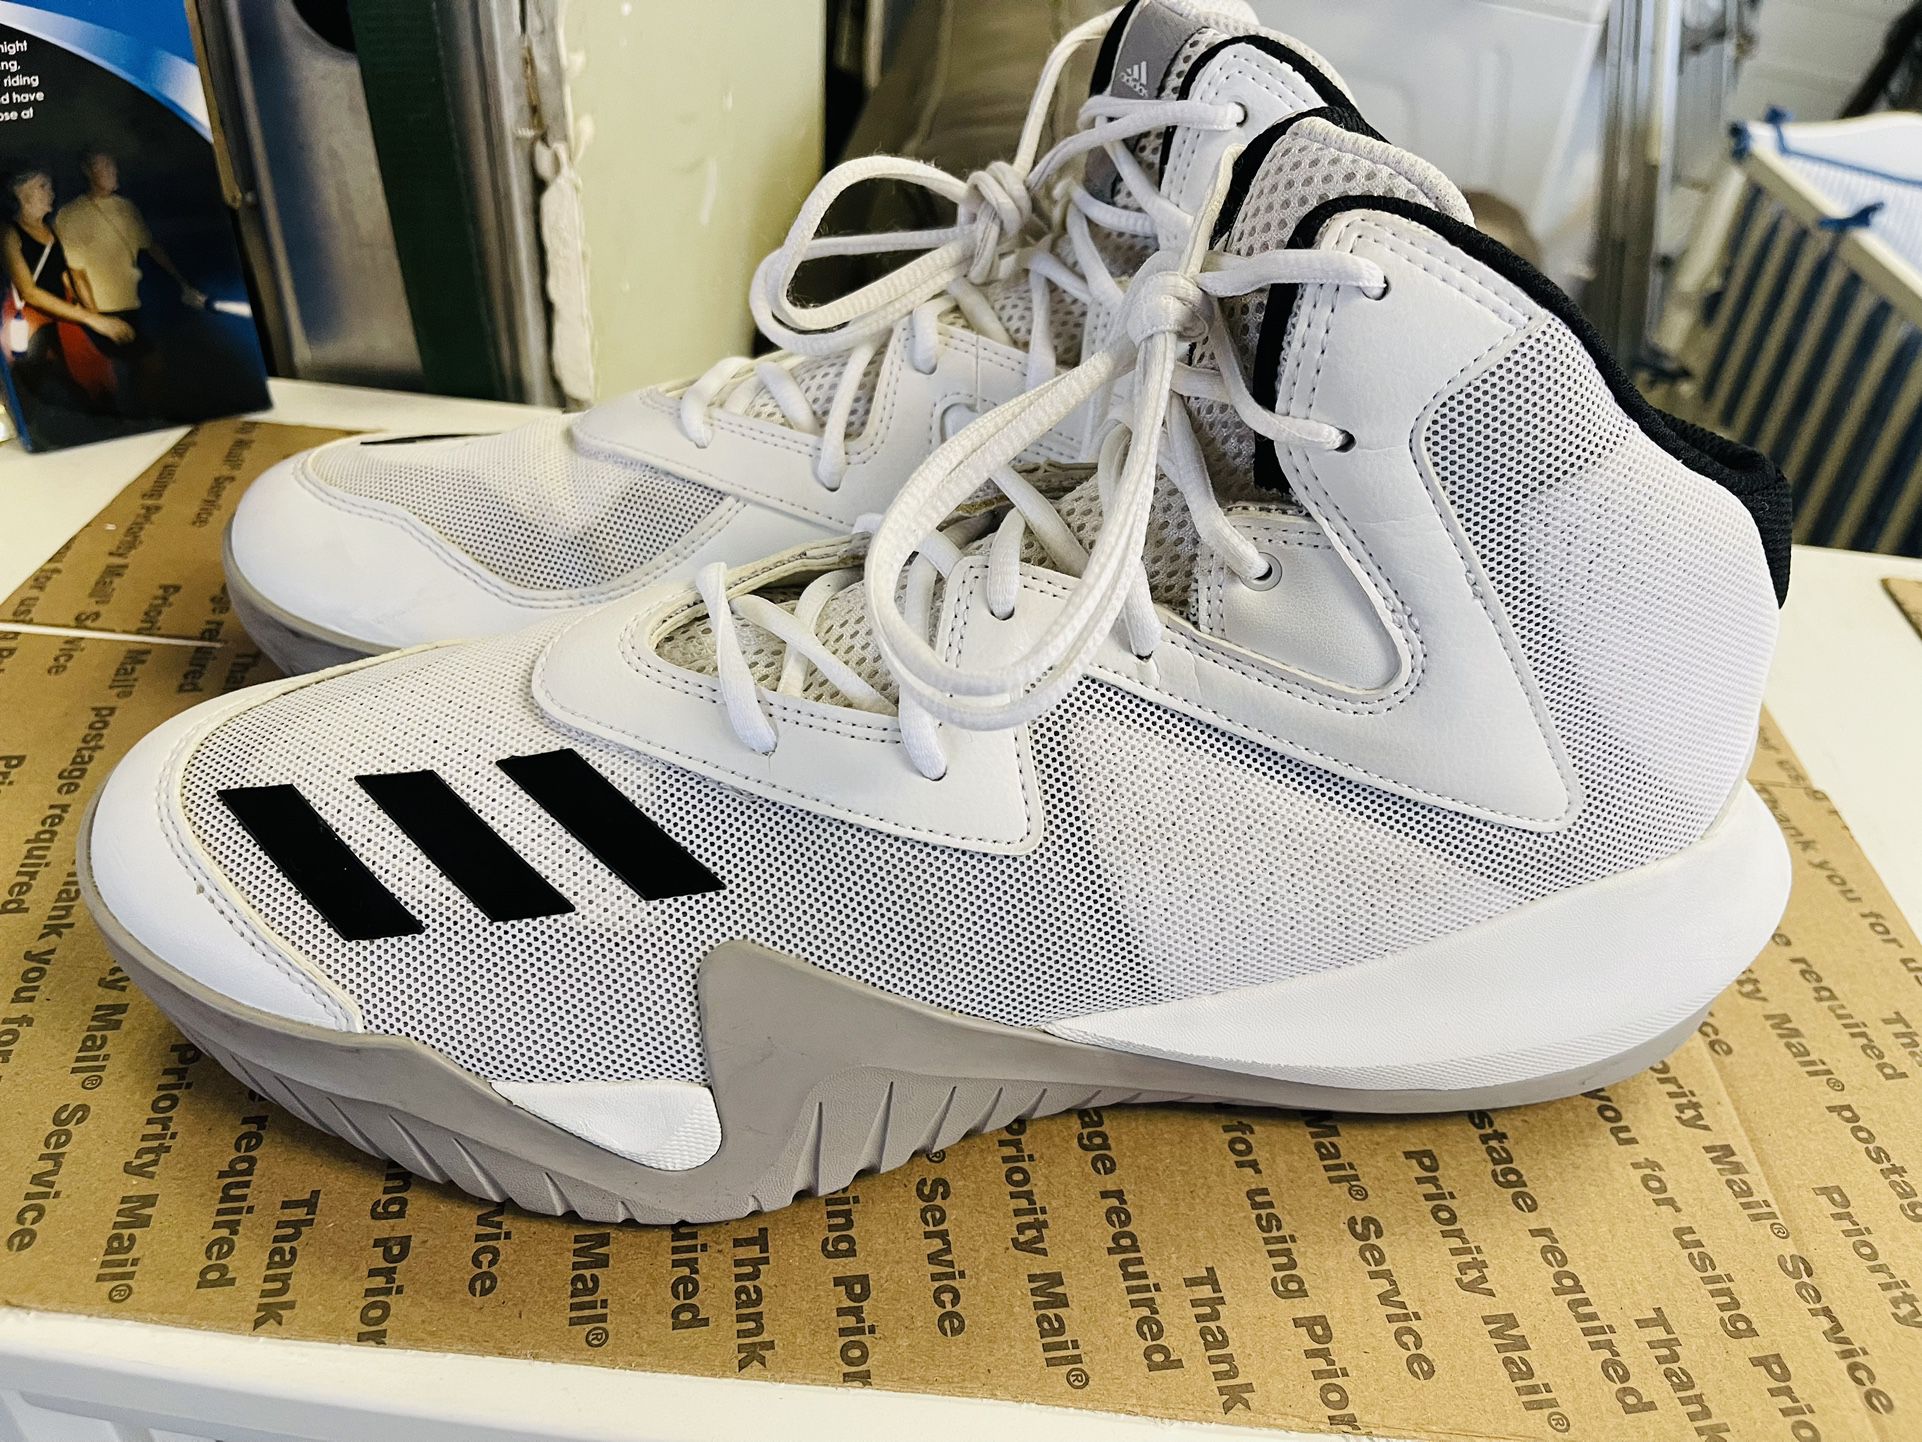 “SIZE 12.5” MENS Adidas Crazy Team Basketball Shoes BY3927 White Black Stripes